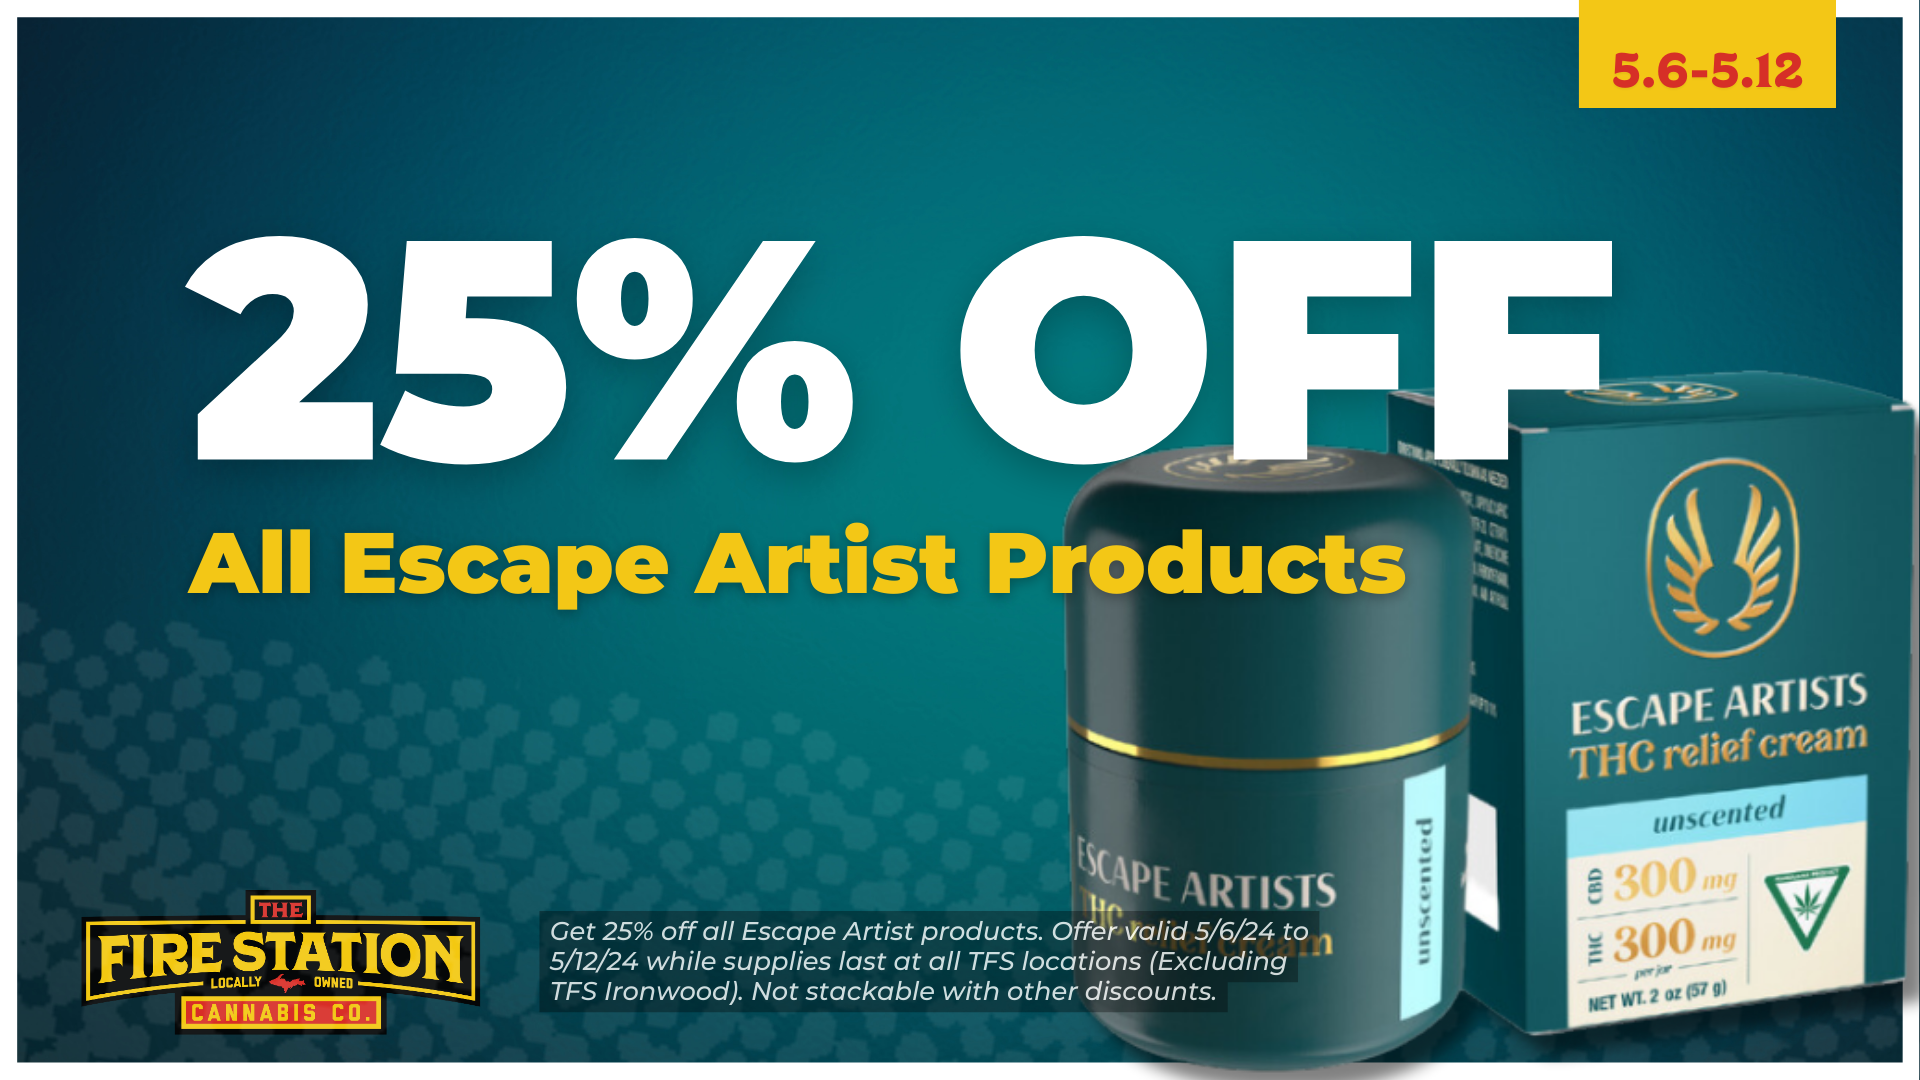 Get 25% off all Escape Artist products. Offer valid 5/6/24 to 5/12/24 while supplies last at all TFS locations (Excluding TFS Ironwood). Not stackable with other discounts.